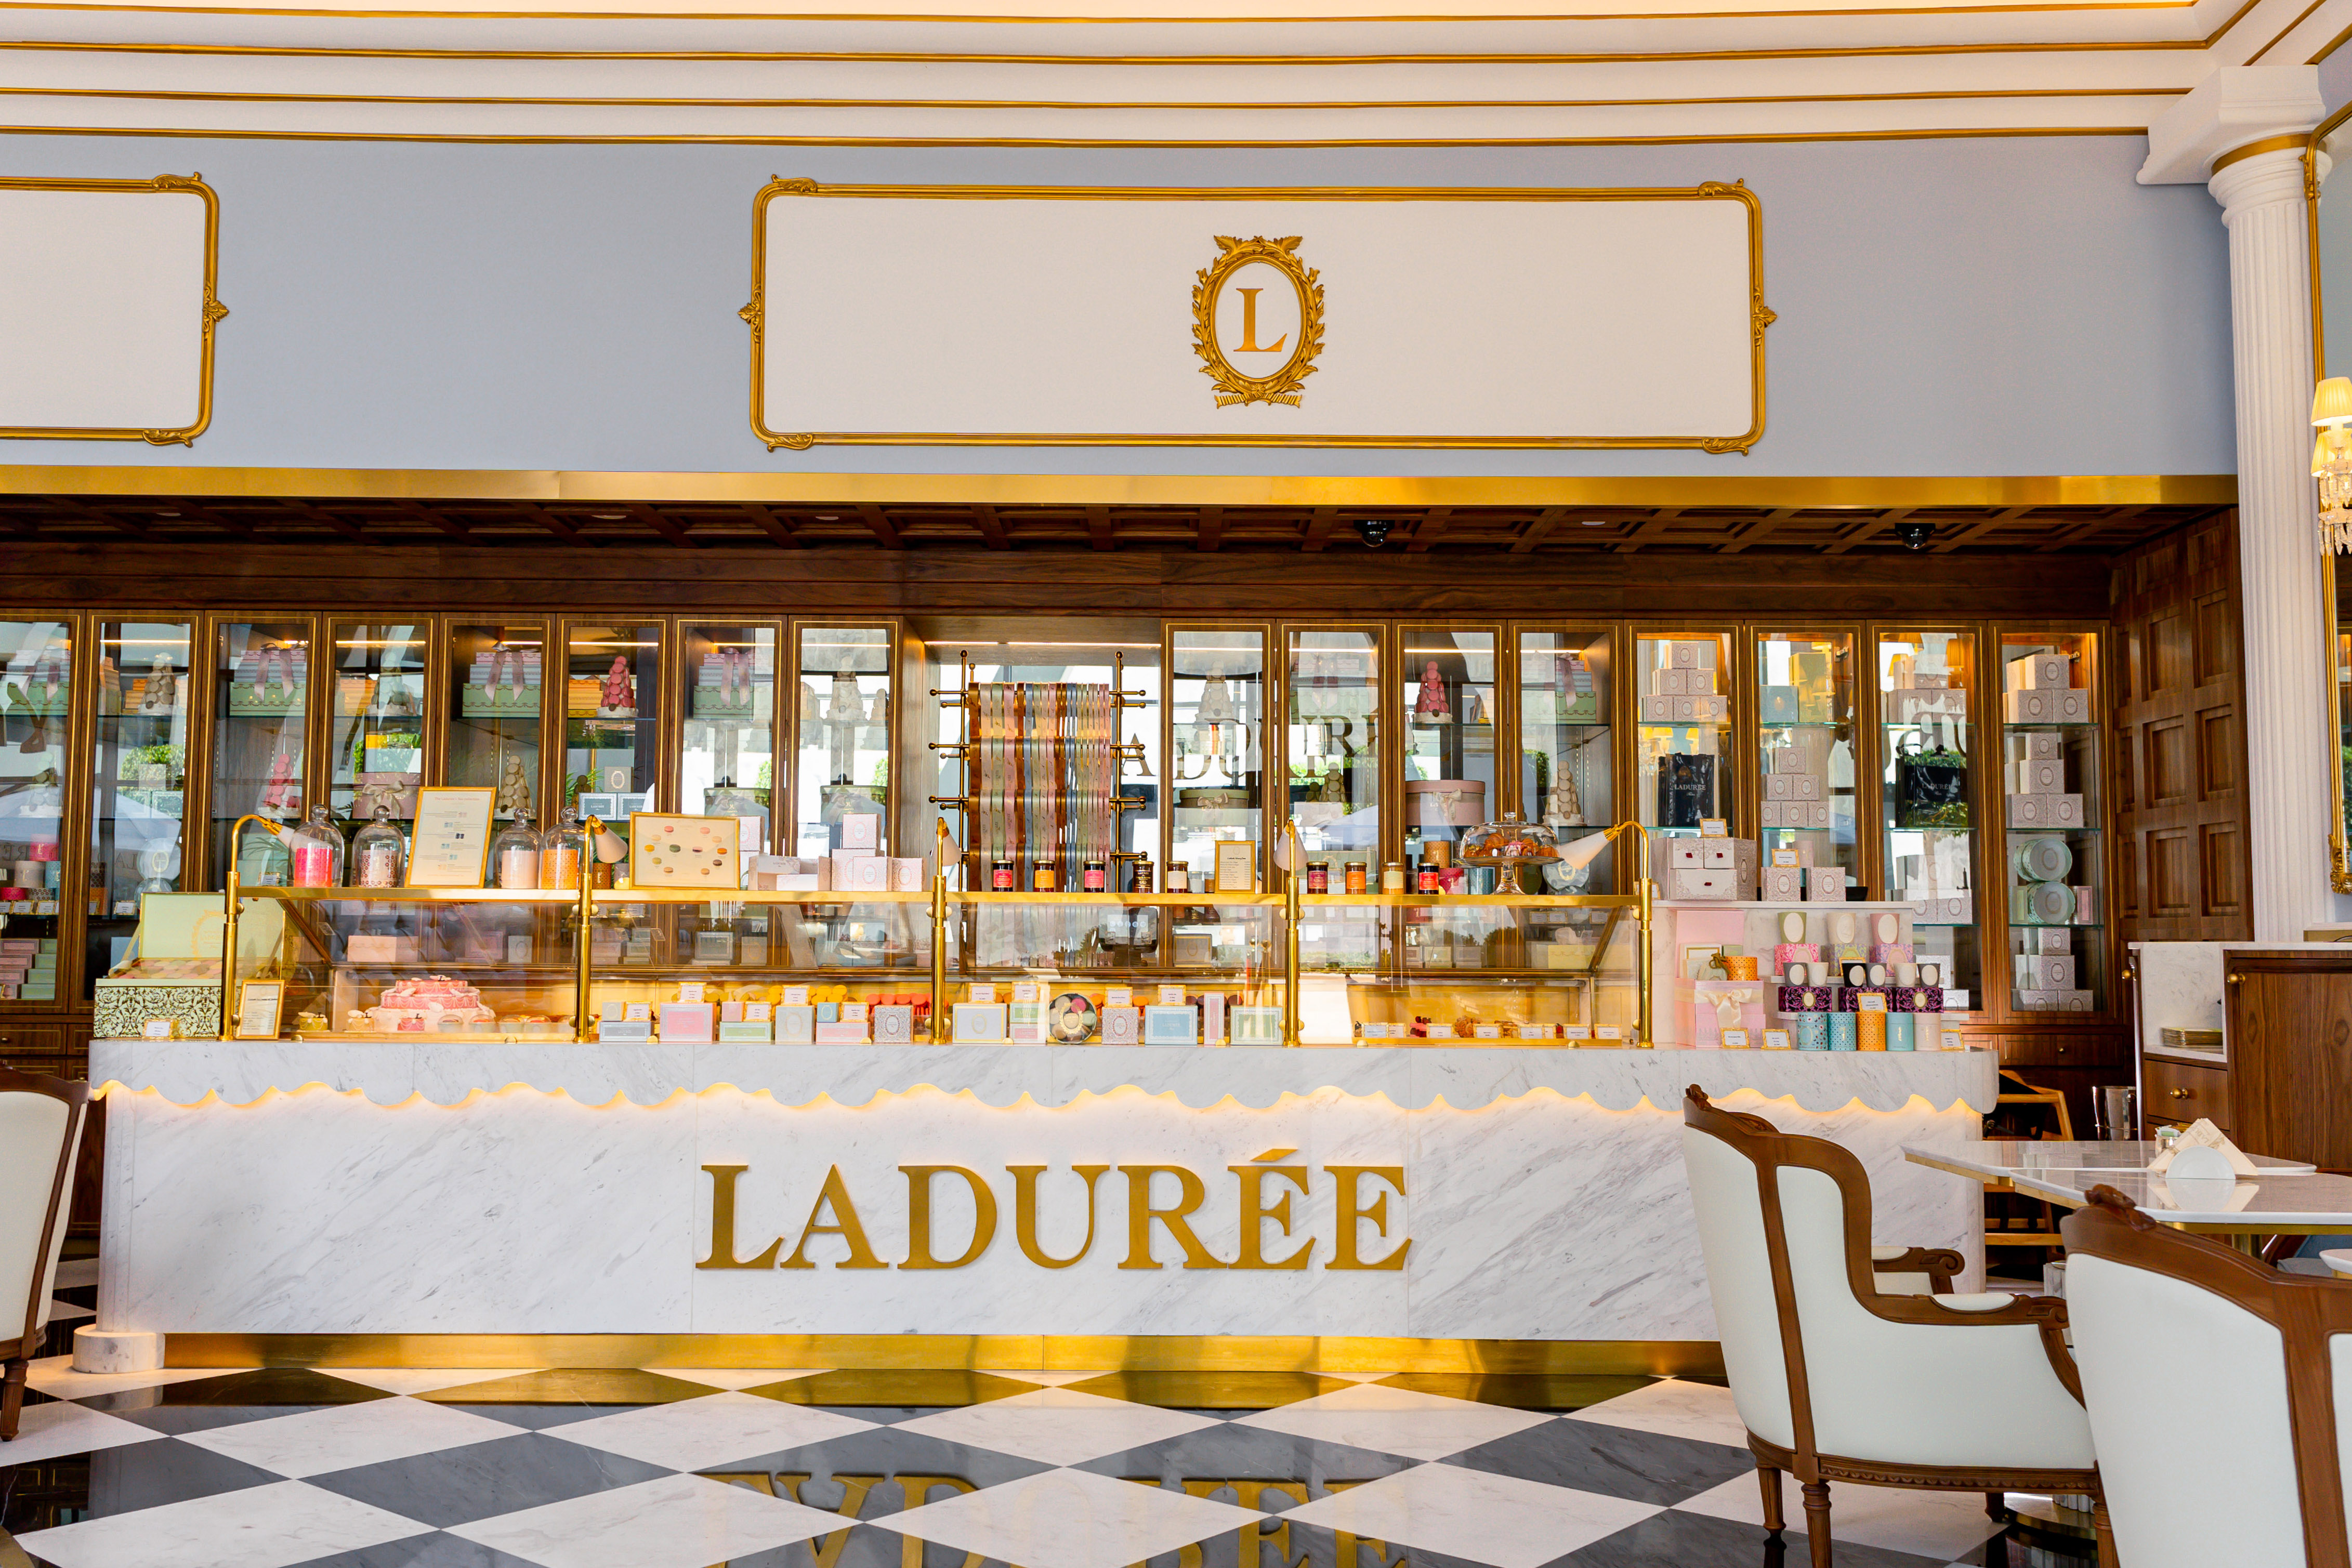 Ladurée Opens Its Signature Branch In Abu Dhabi, Blending French Elegance And Middle Eastern Culture